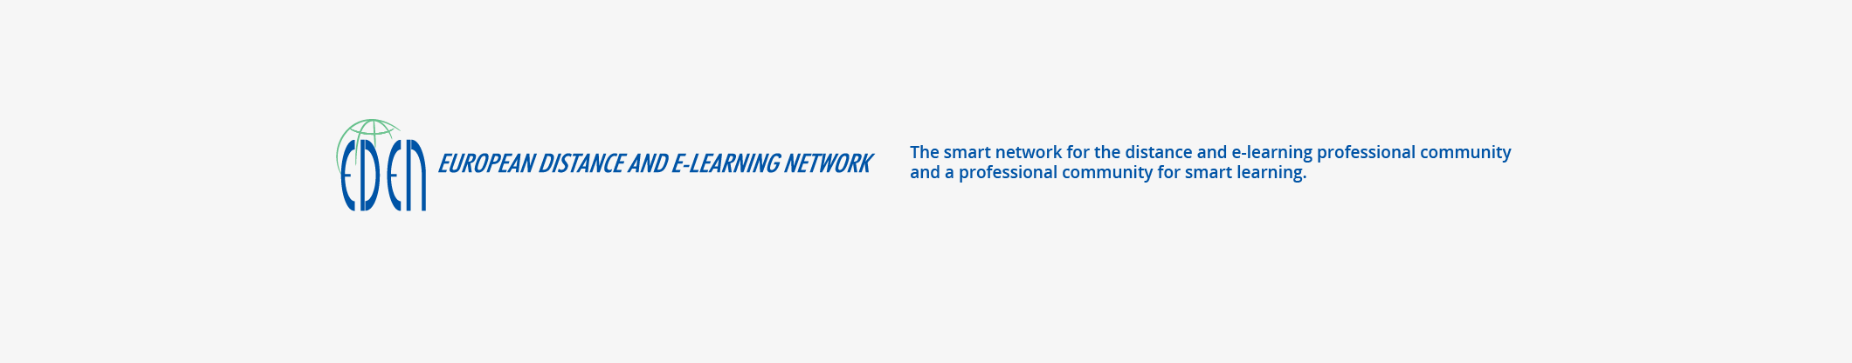 EDEN - European Distance and E-learning Network's background image'